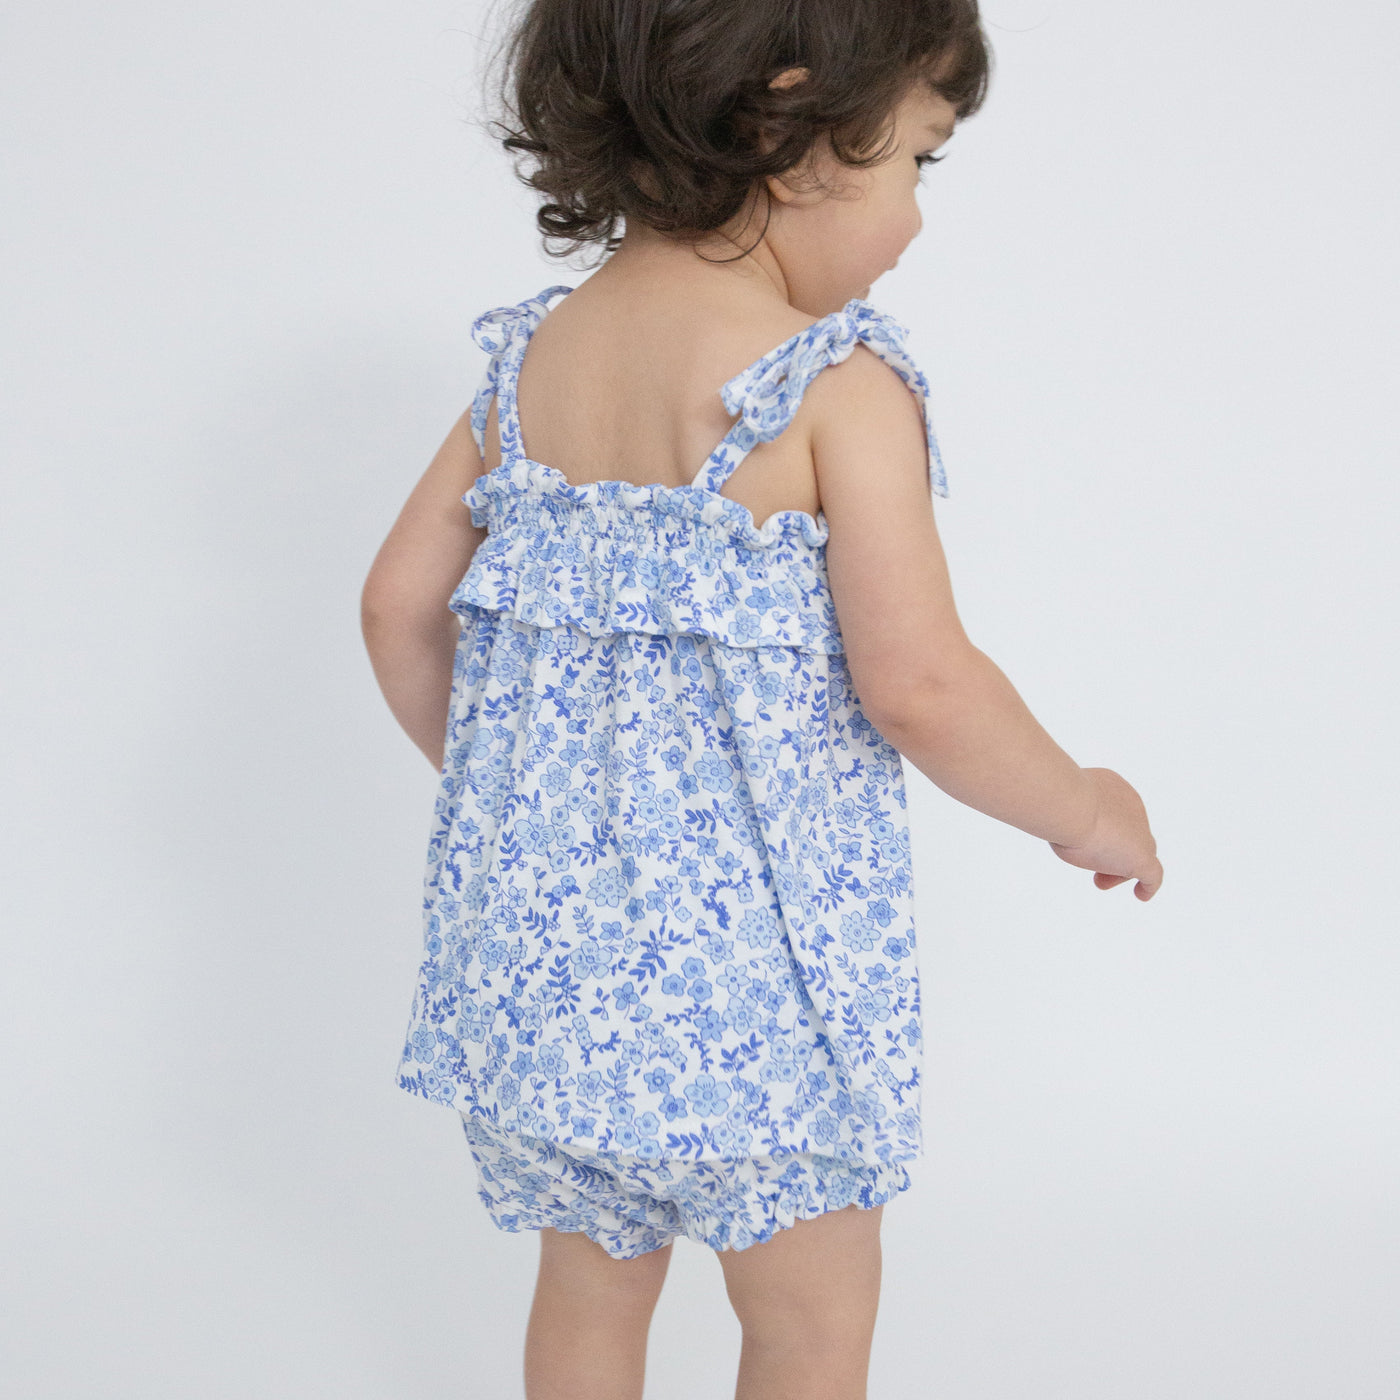 Ruffle Top & Bloomer - Blue Calico Floral - Angel Dear